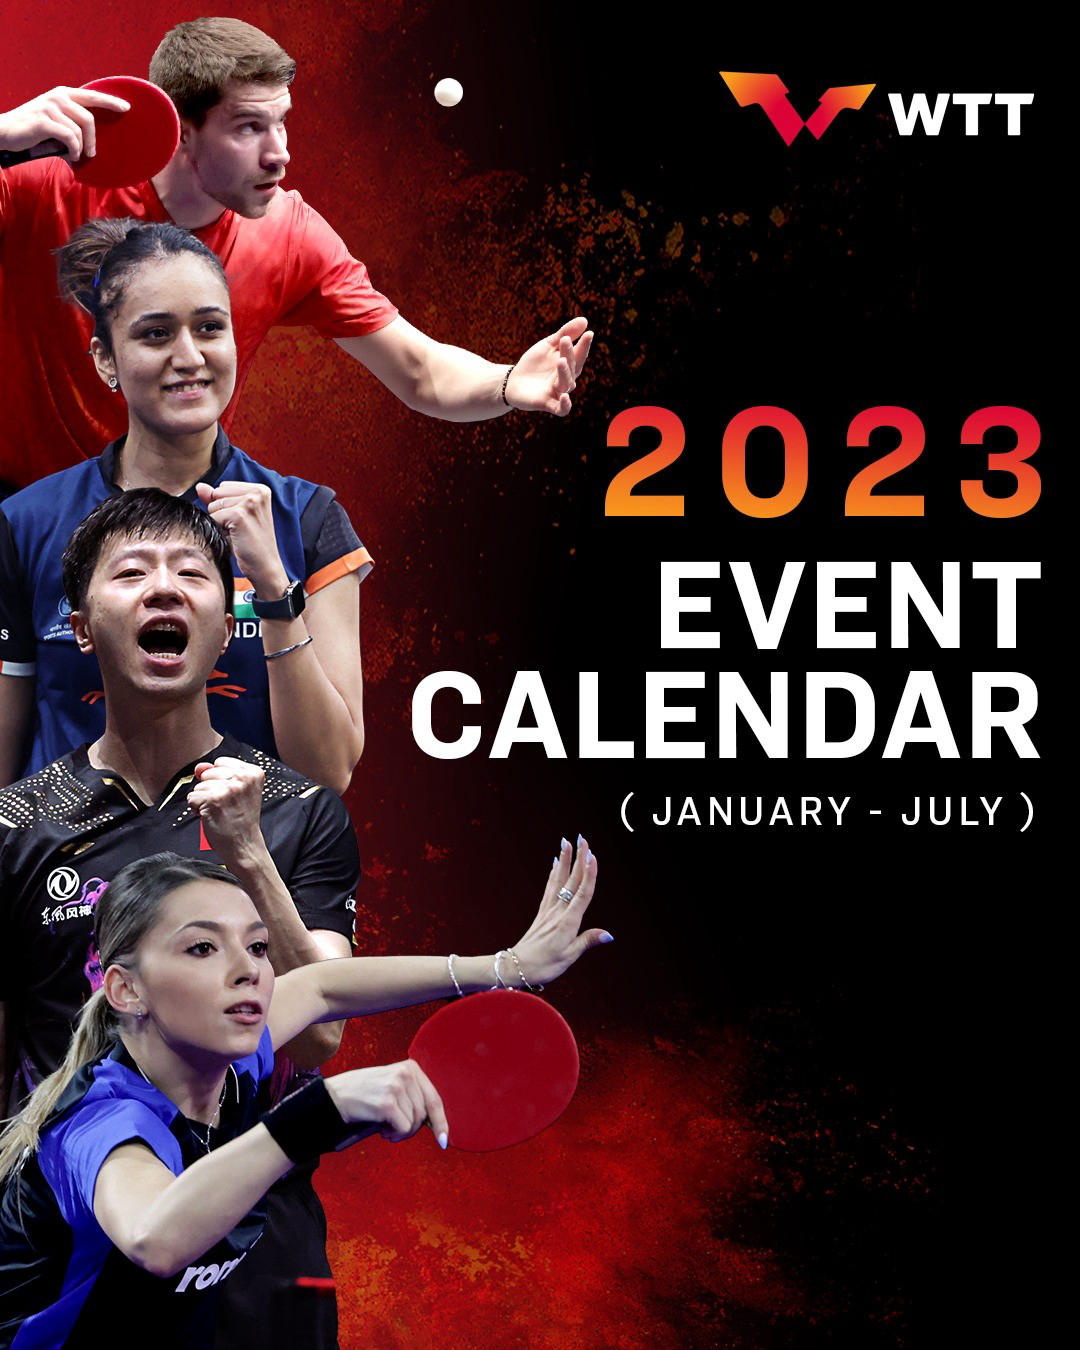 image  1 World Table Tennis - With a new year comes new events for World Table Tennis